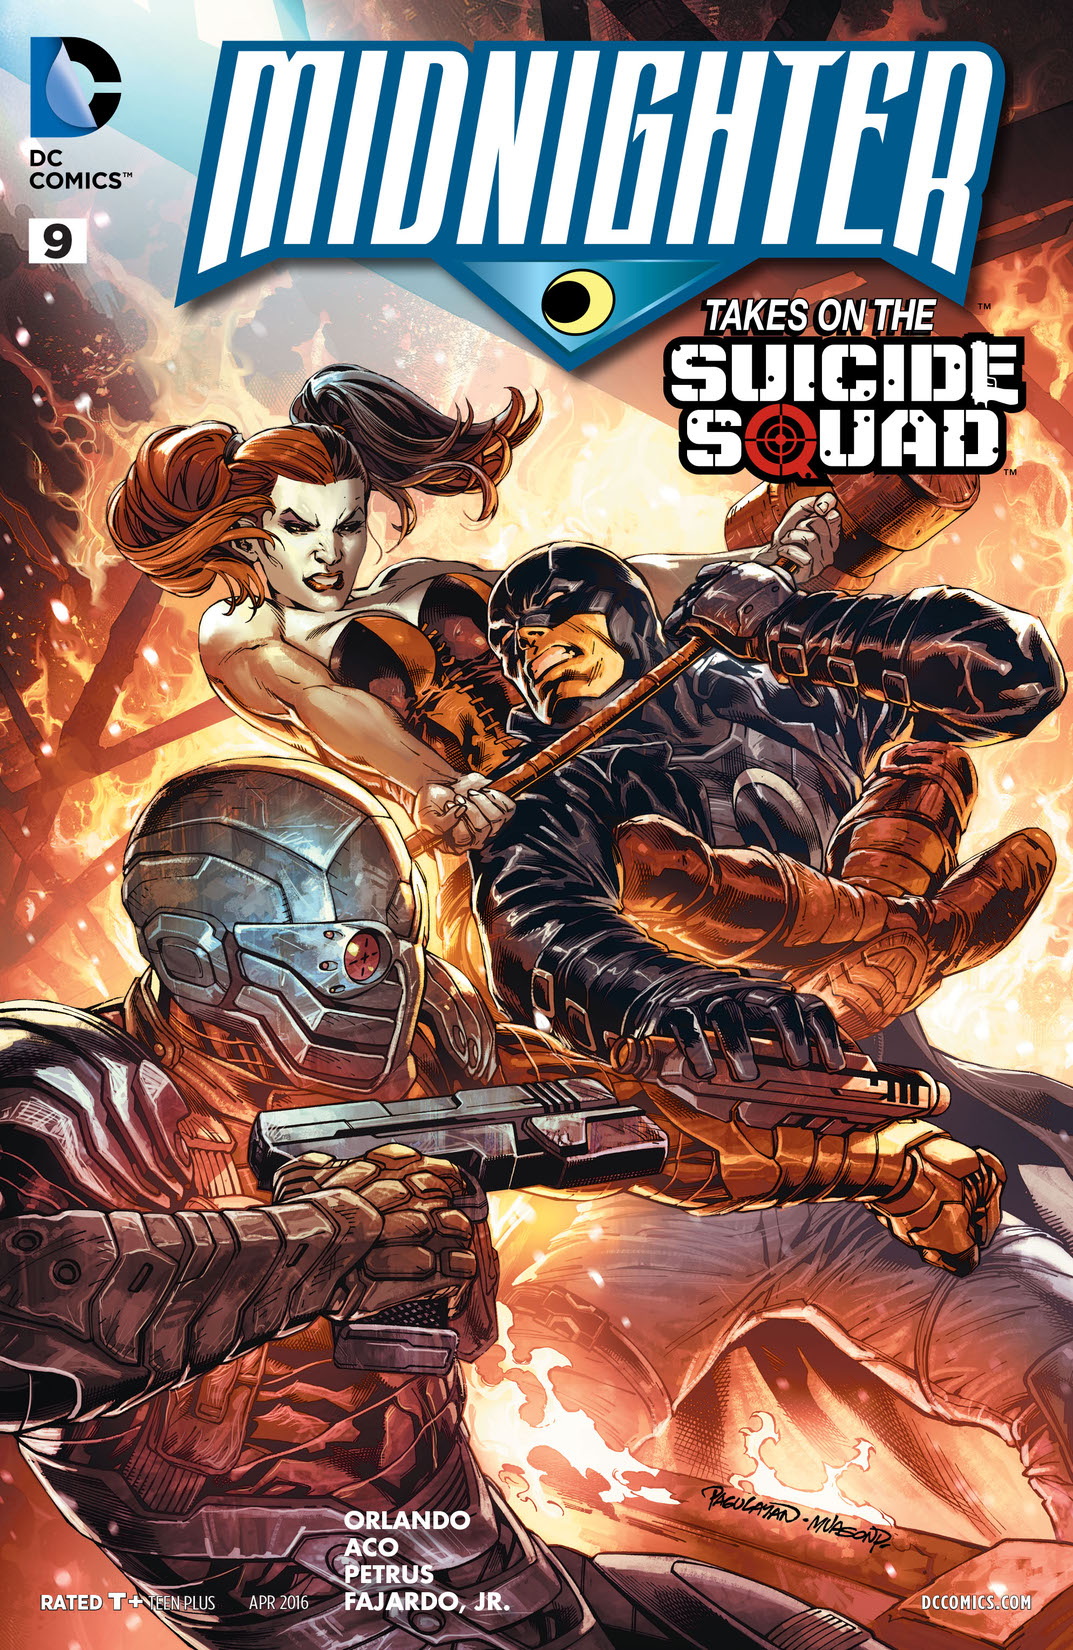 Midnighter (2015-) #9 preview images